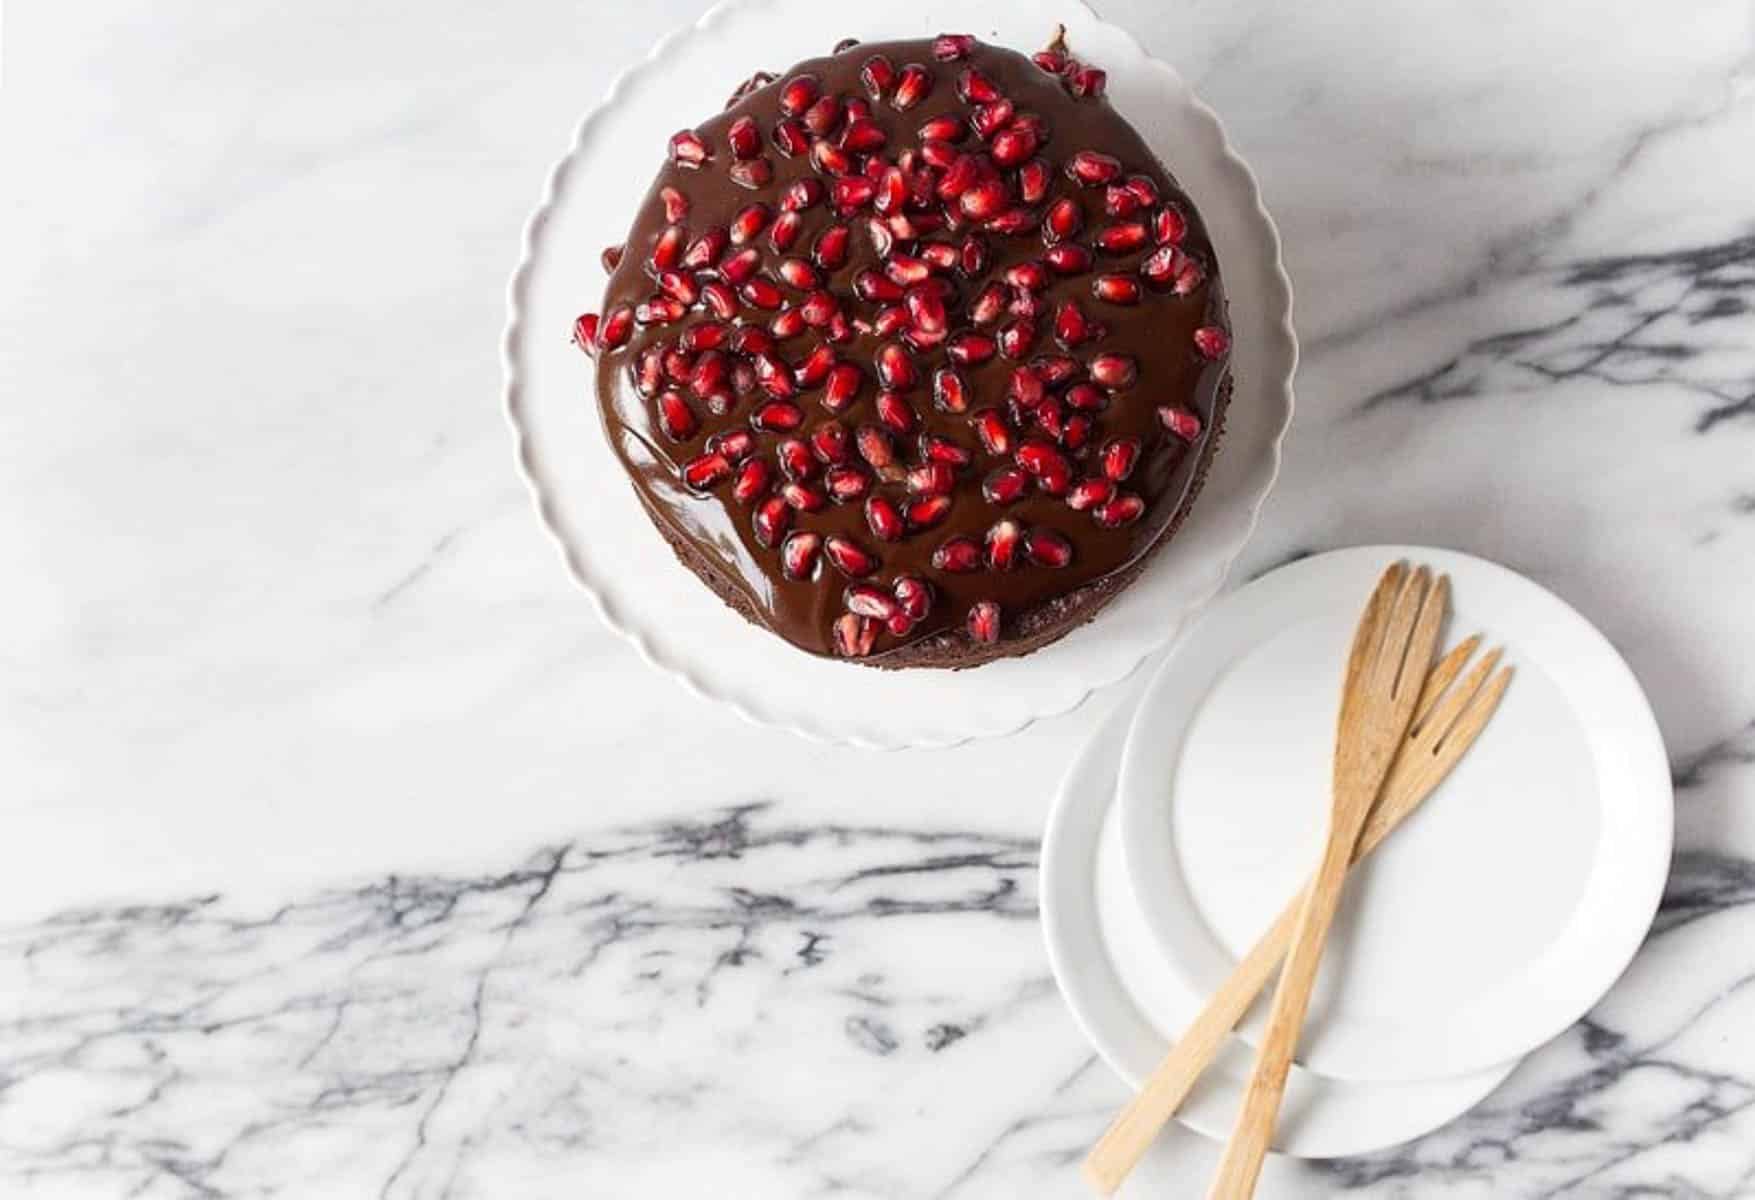 Overhead shot of small chocolate cake on white cake stand with pomegranate seeds on top.